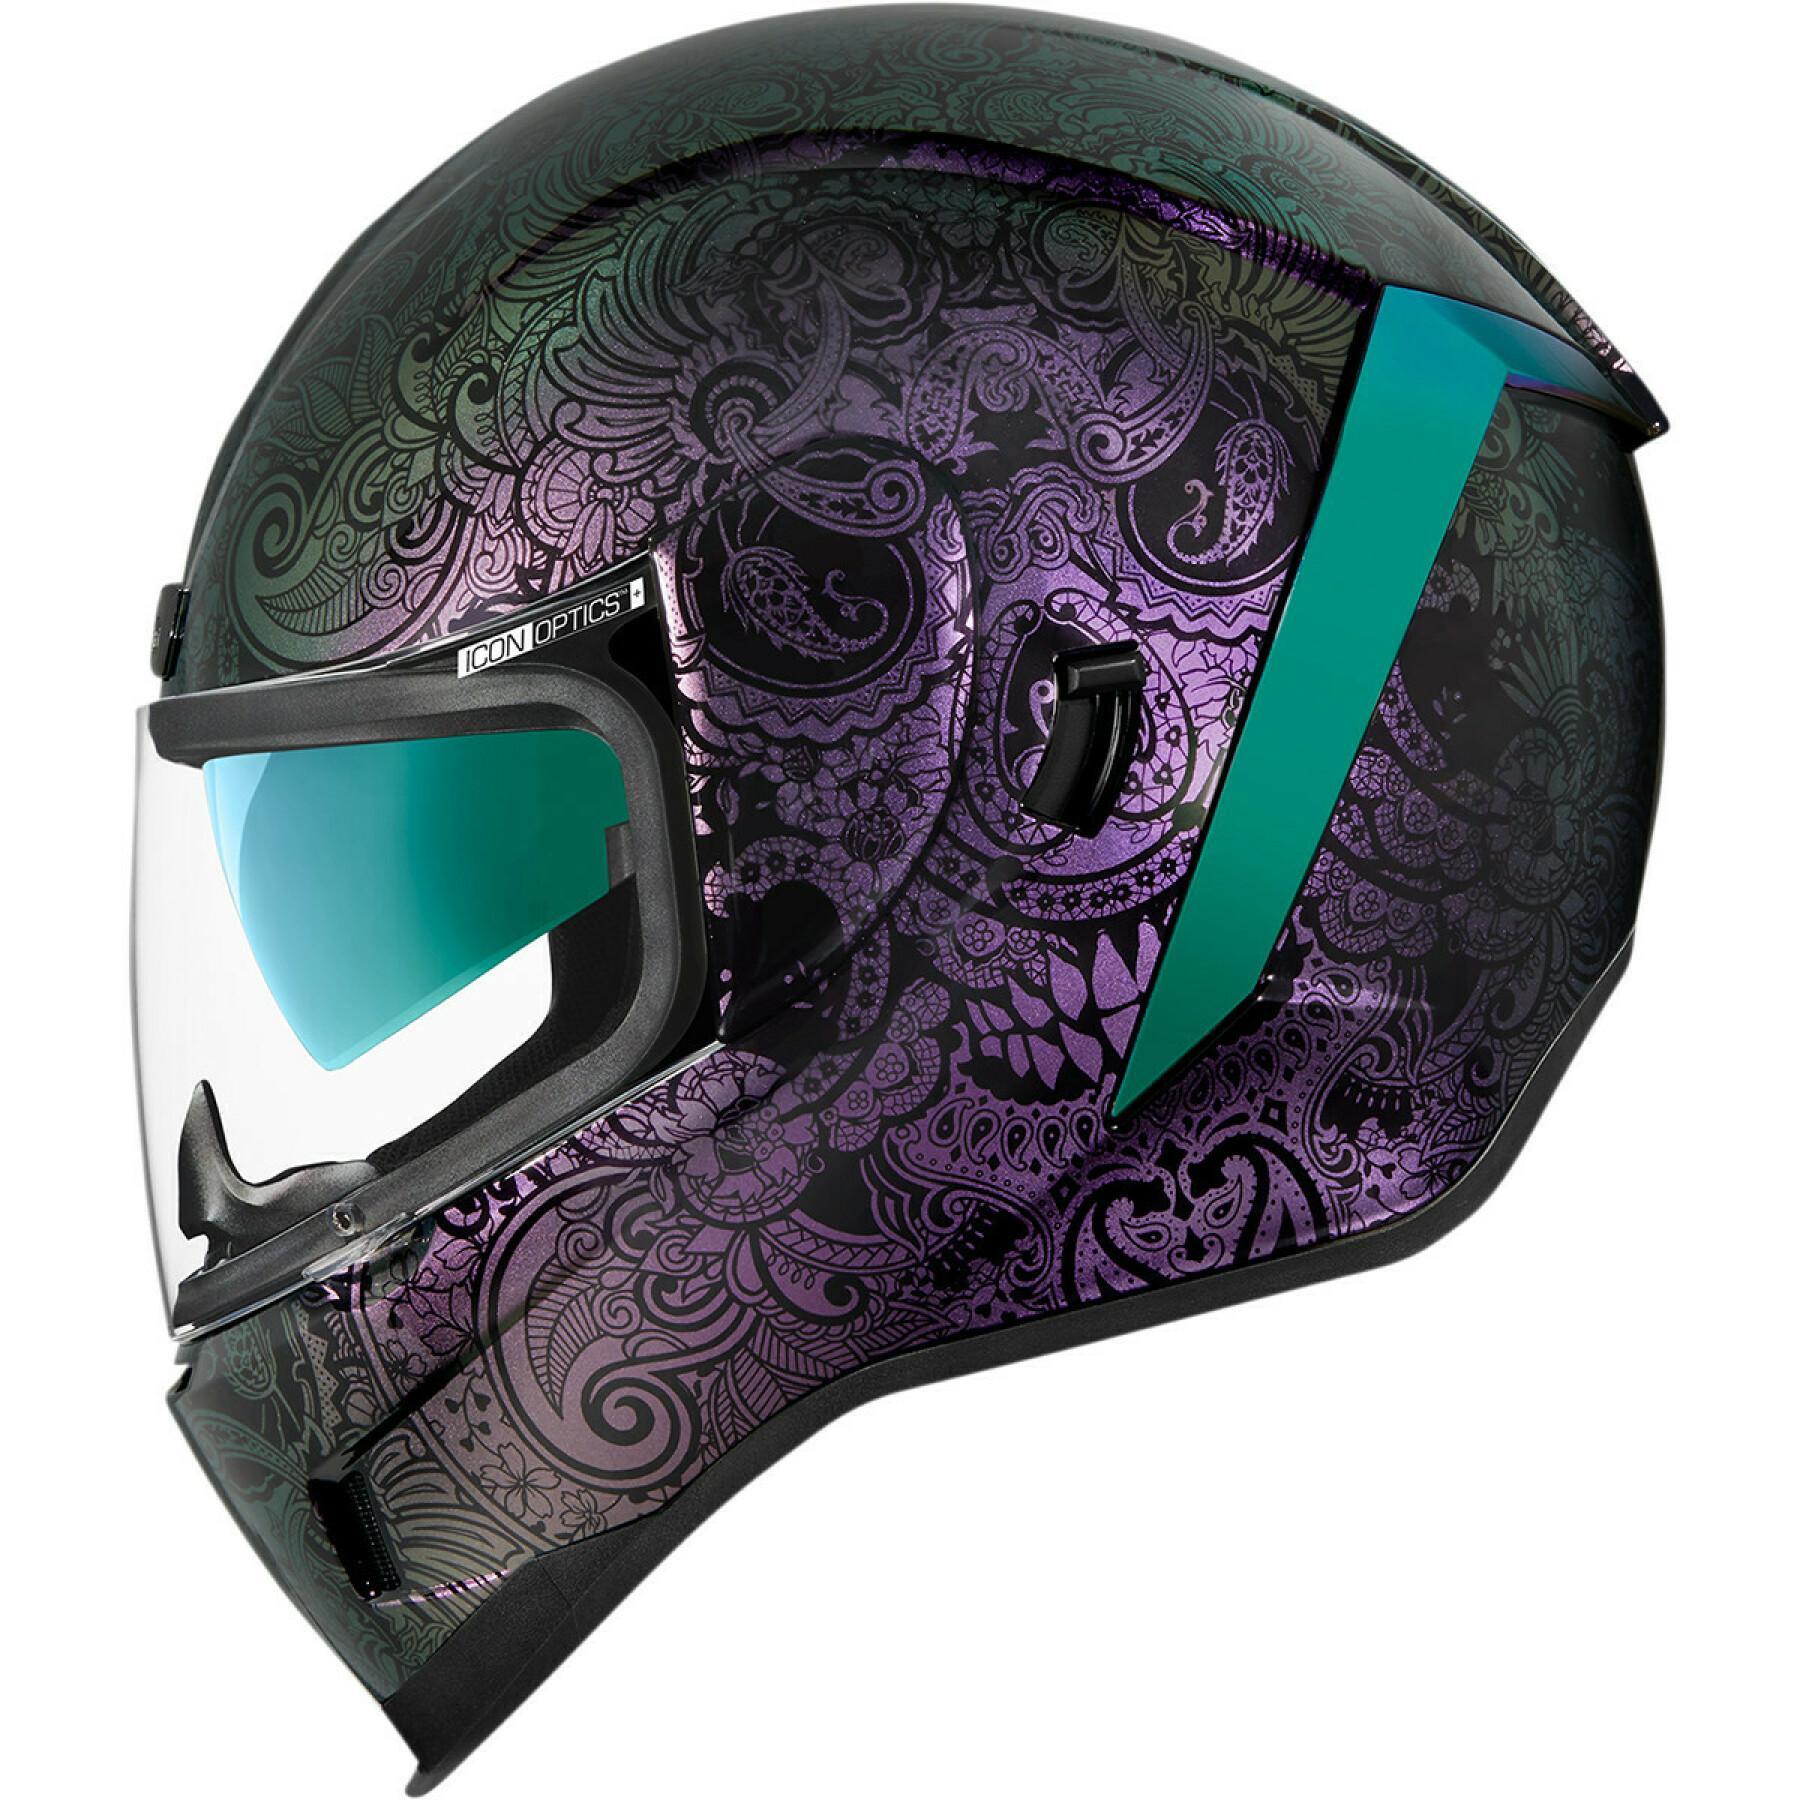 Full face motorcycle helmet Icon afrm chnt-opal pu